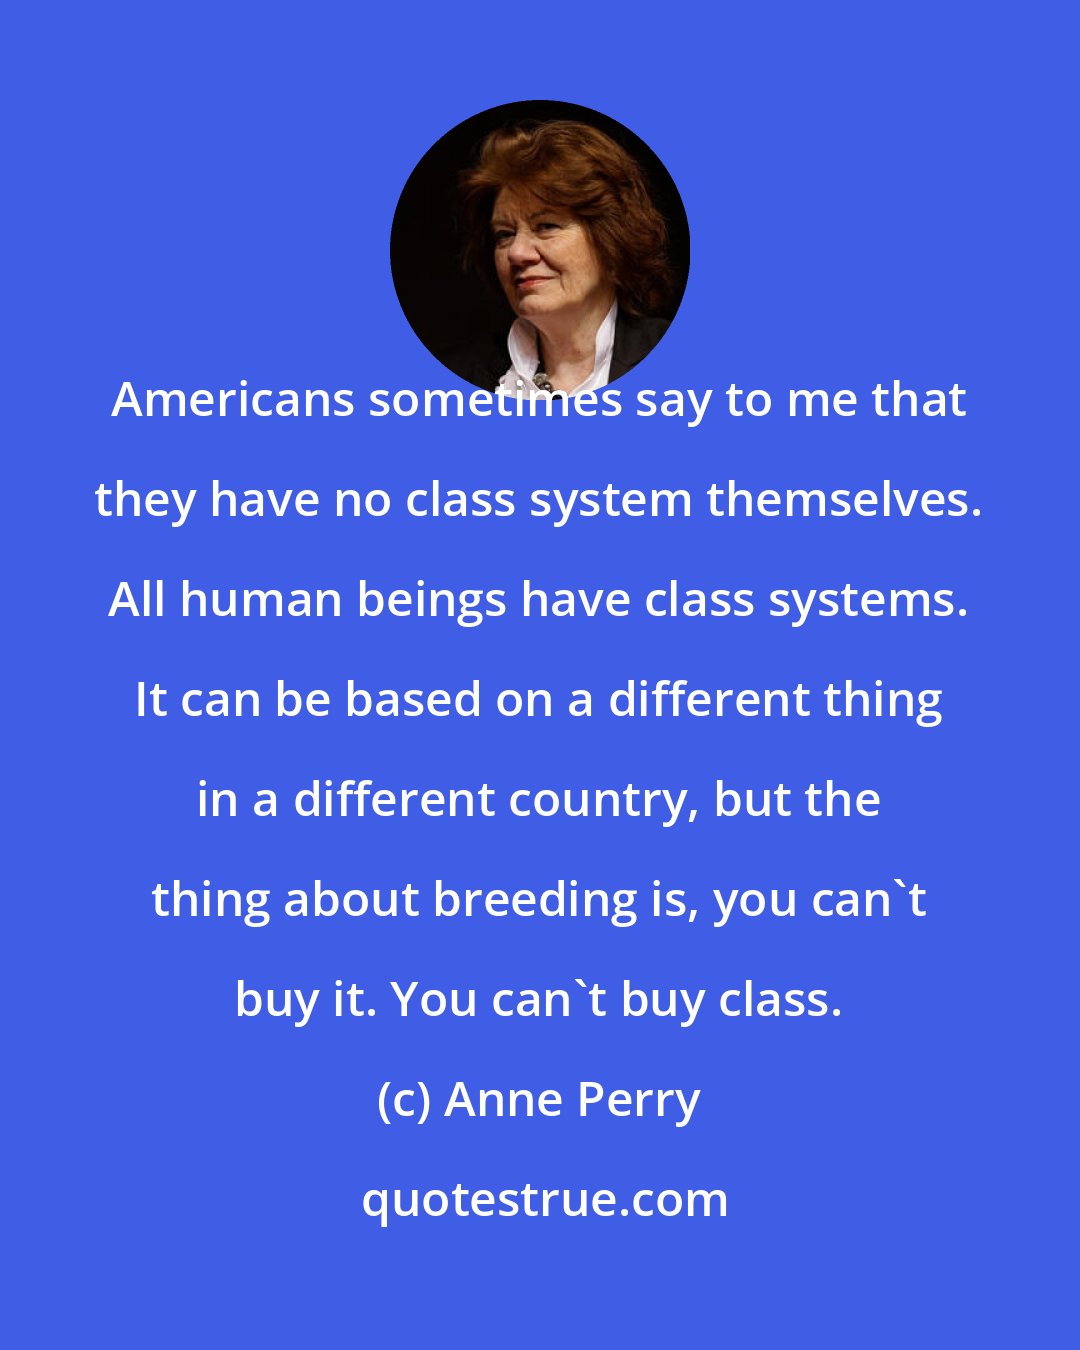 Anne Perry: Americans sometimes say to me that they have no class system themselves. All human beings have class systems. It can be based on a different thing in a different country, but the thing about breeding is, you can't buy it. You can't buy class.